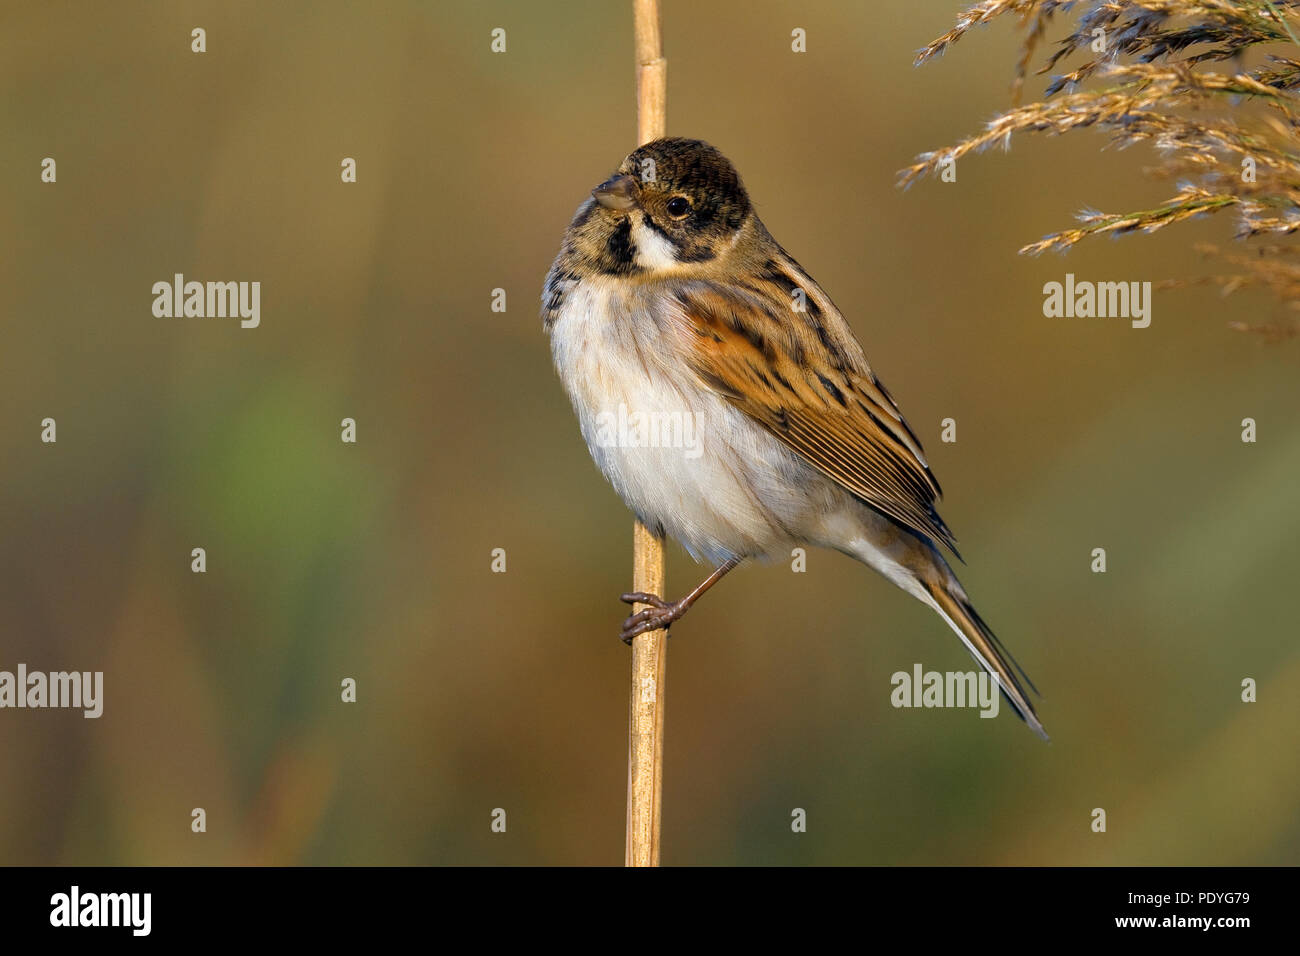 Reed Bunting in non-breeding plumage on reed stem Stock Photo